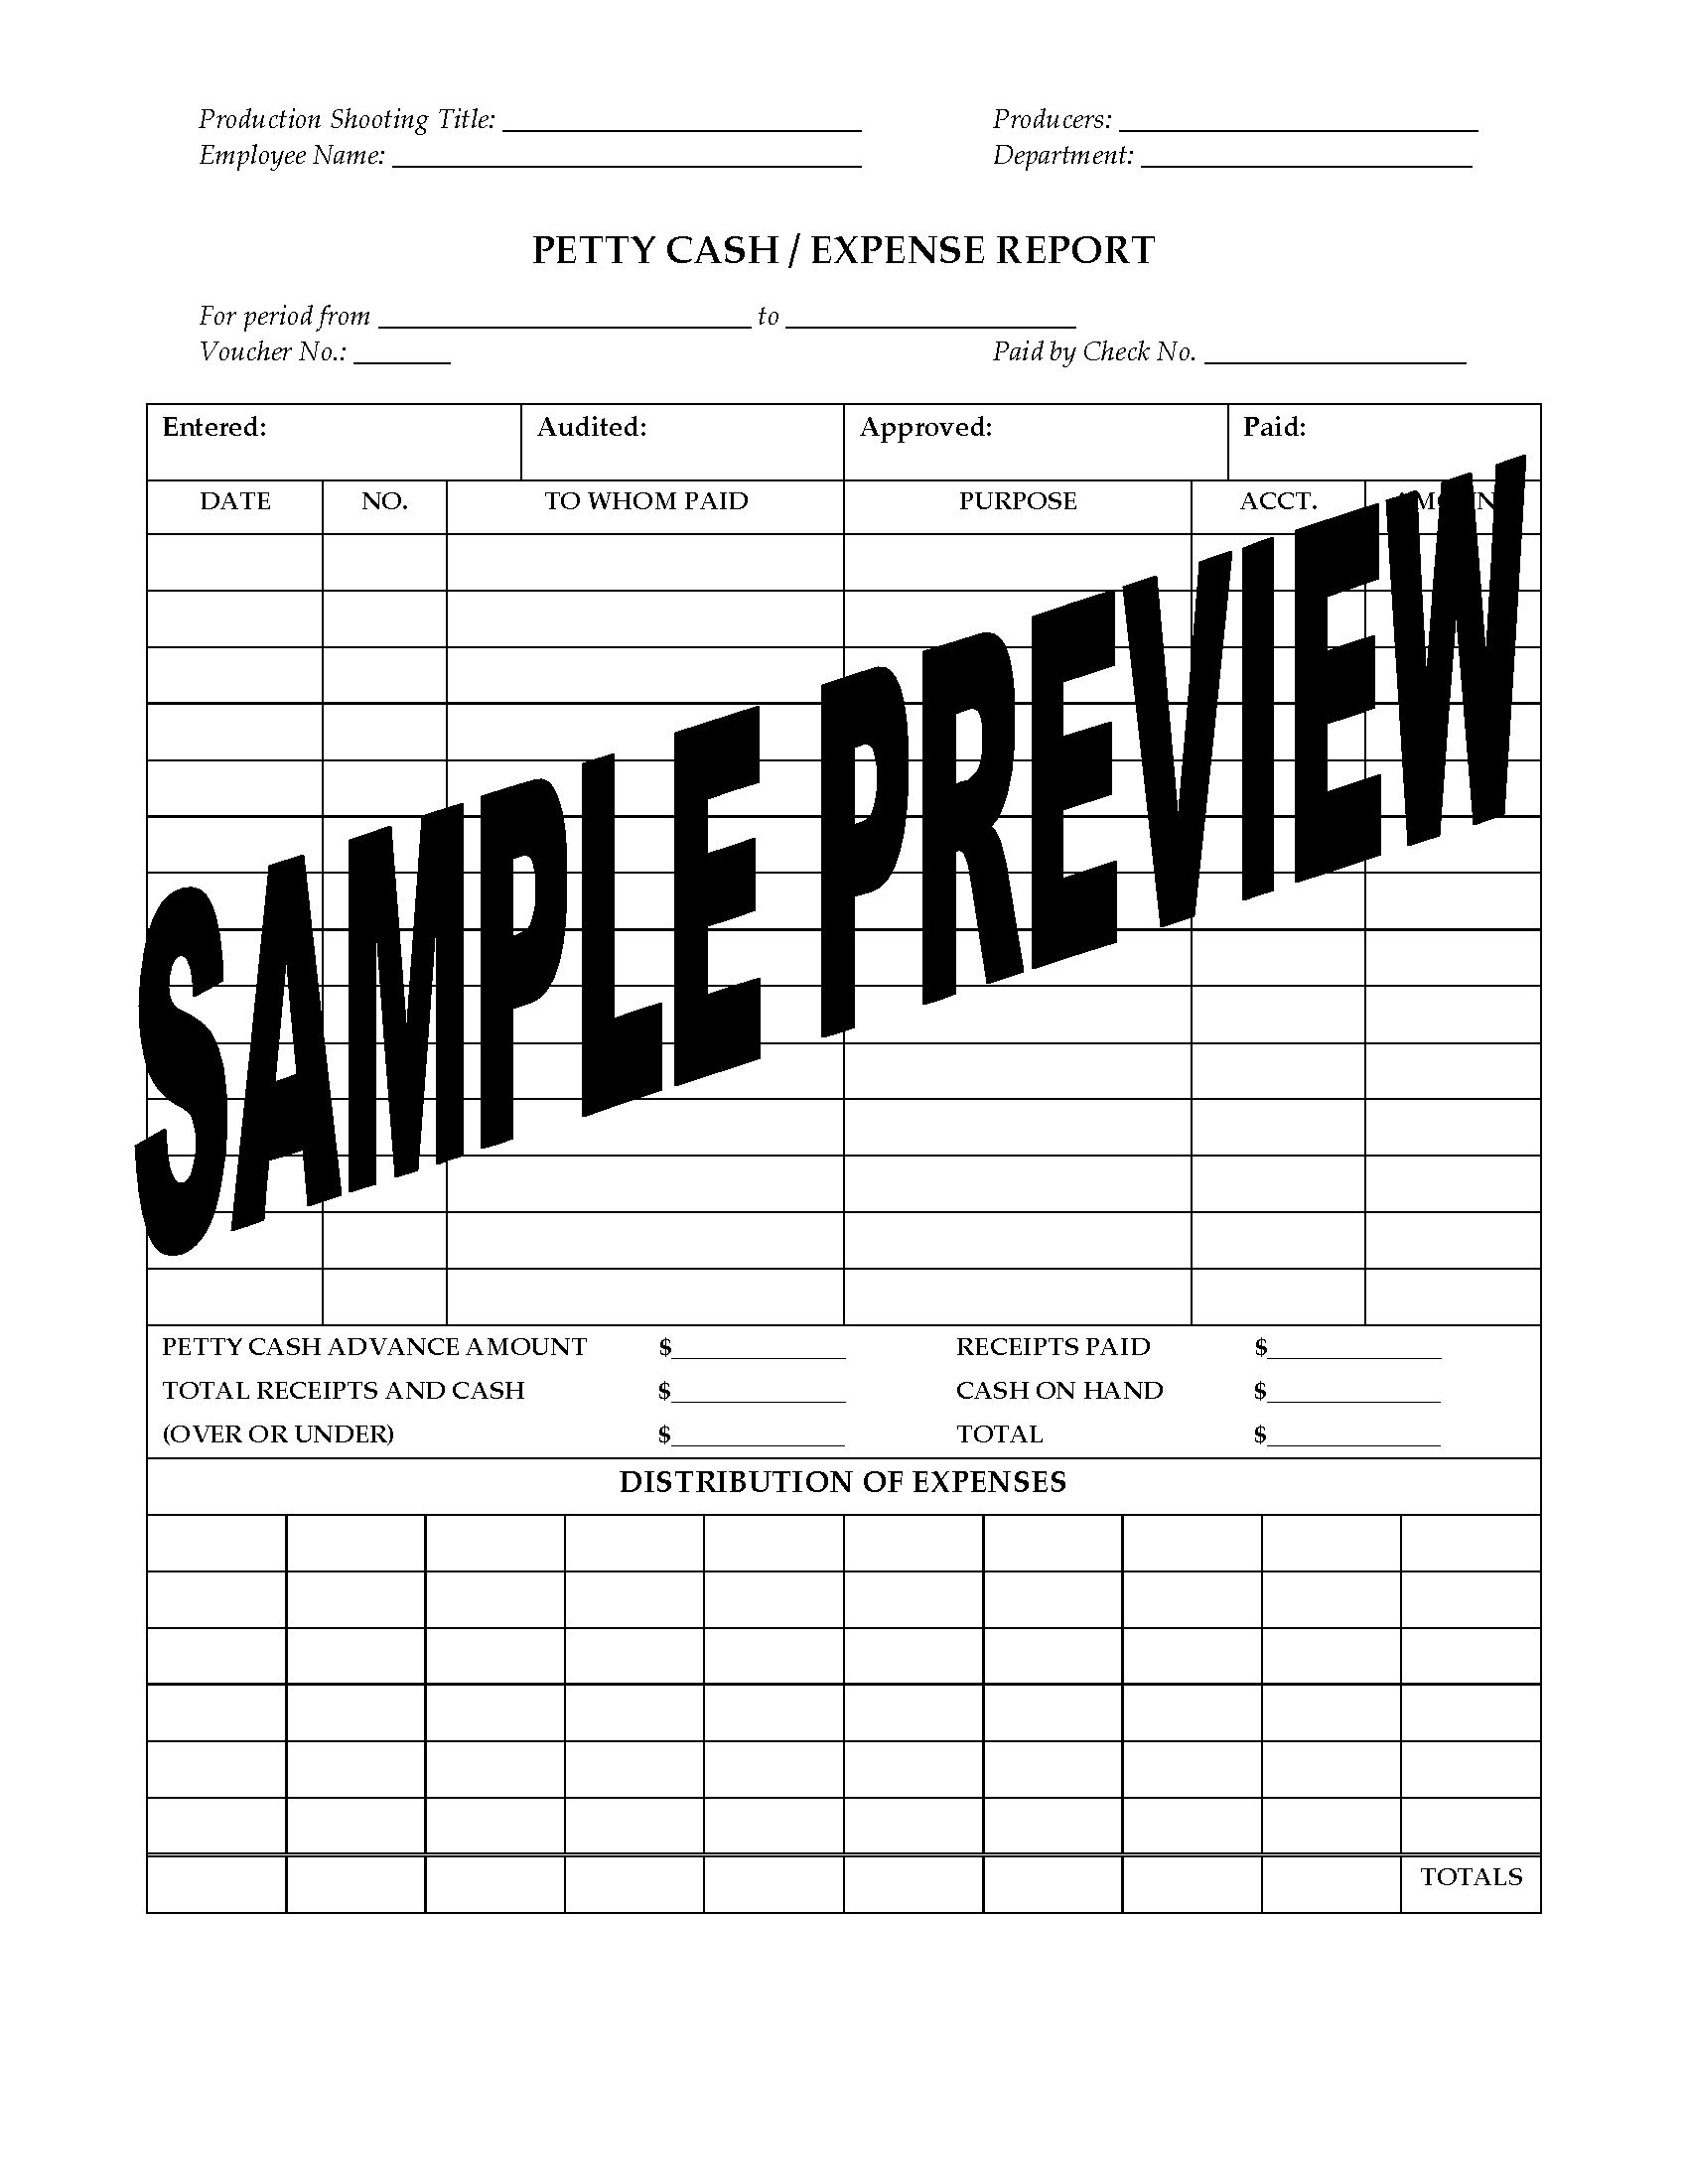 Petty Cash Expense Report For Film Or TV Production Legal Forms Document